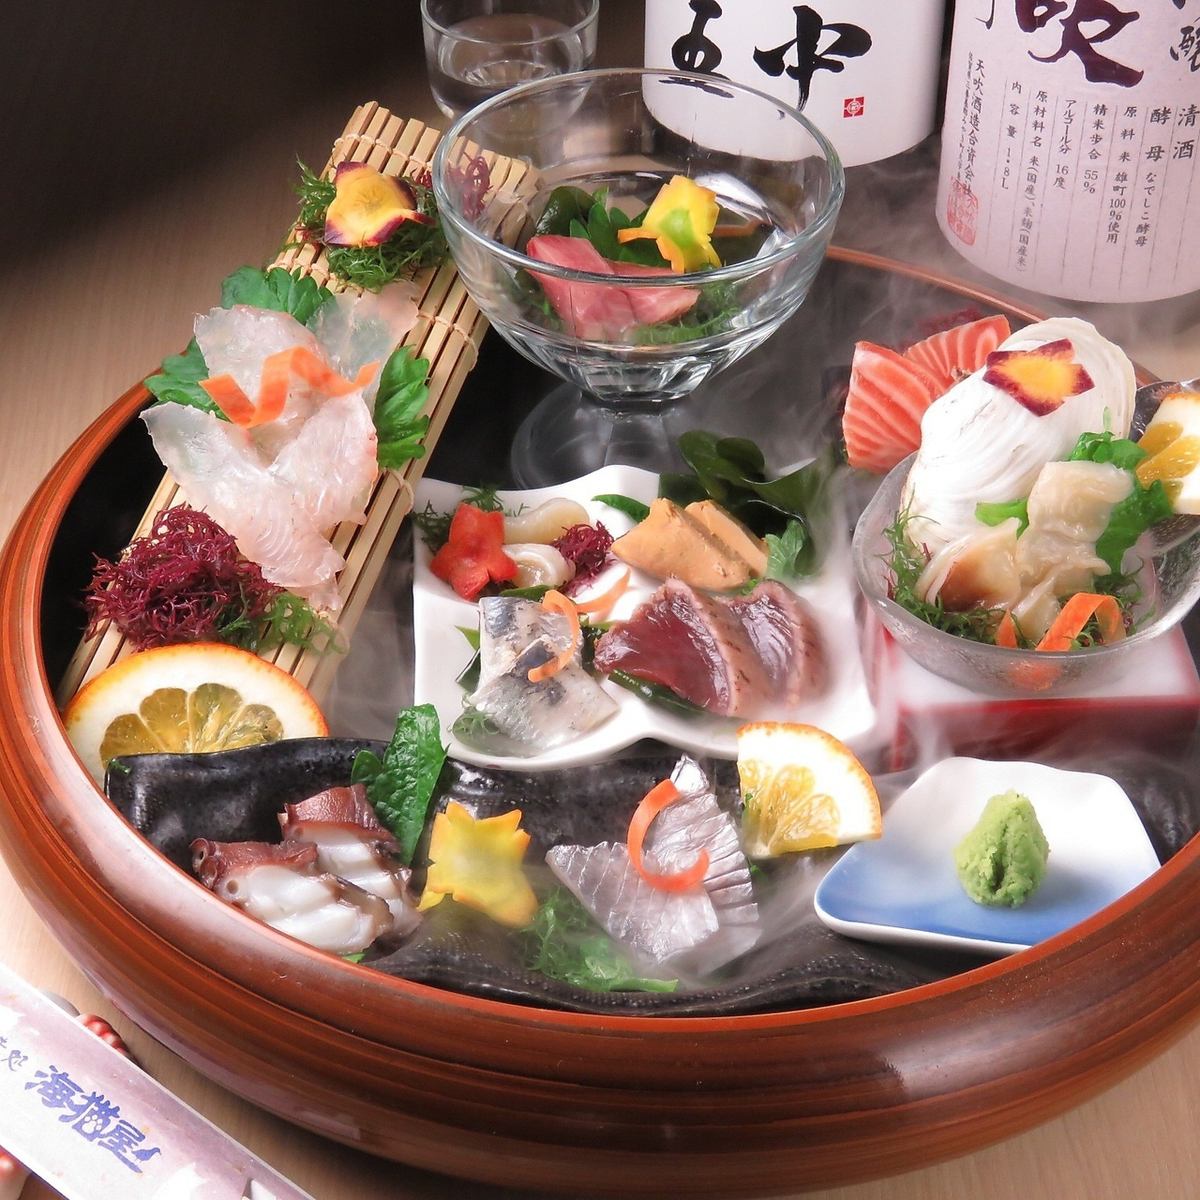 Open from 7:30 a.m.! Courses with fresh sashimi and mizutaki (all-you-can-drink) starting at 4,400 yen